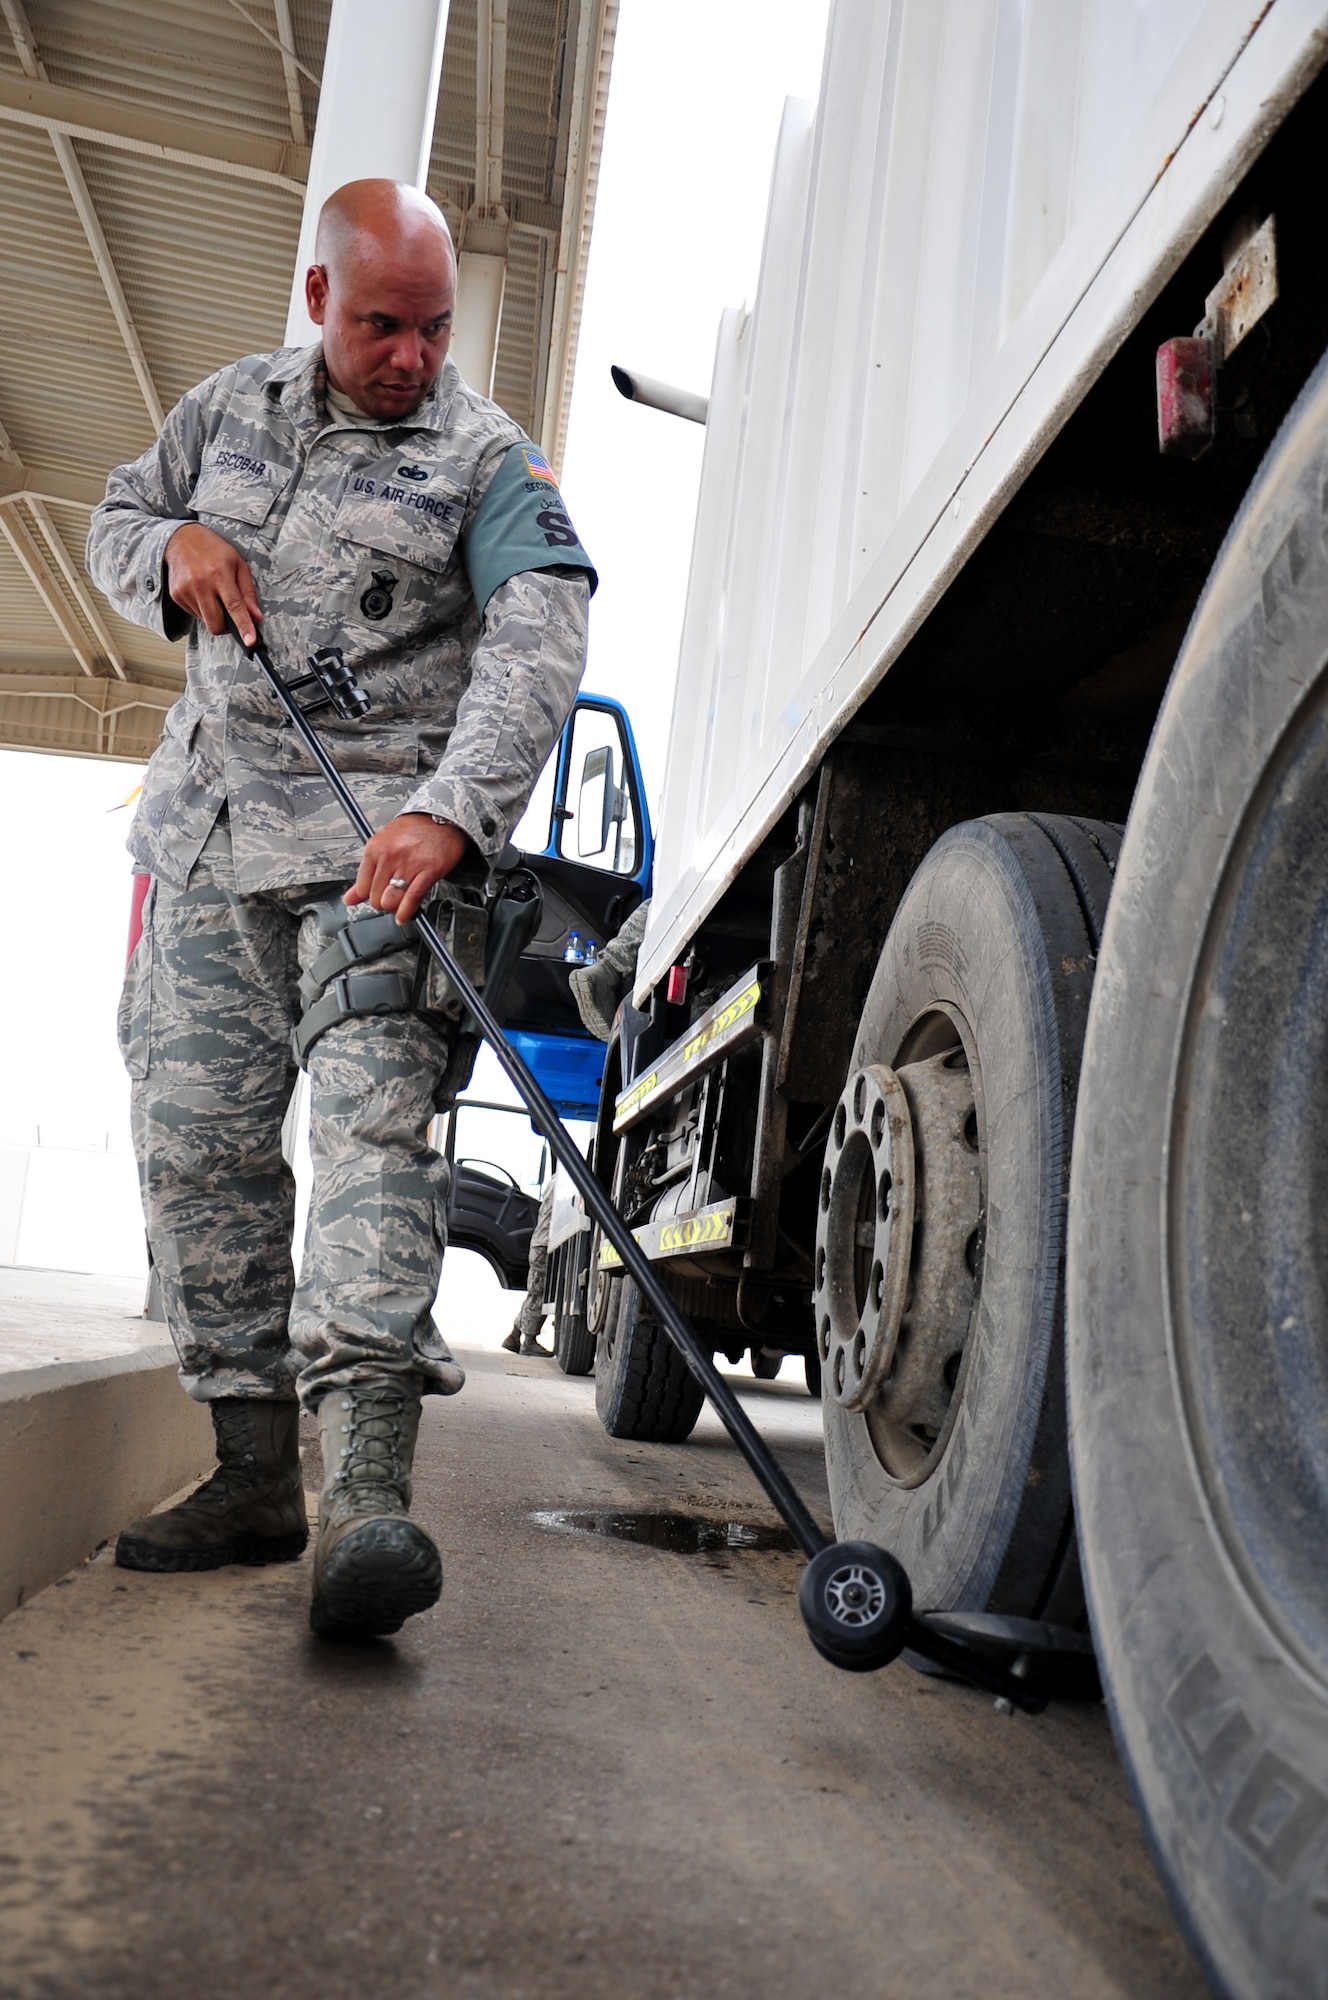 U.S. Air Force Staff Sgt. Luis Escobar, 380th Expeditionary Security Forces Squadron vehicle search area assistant flight chief, uses a mirror to check the underside of a large truck during a search April 30, 2013. 380 ESFS "defenders" provide 24/7 security for base assets and personnel. Escobar is a deployed member of Puerto Rico Air National Guard and is a native of San Juan, Puerto Rico. (U.S. Air Force photo by Staff Sgt. Timothy Boyer)